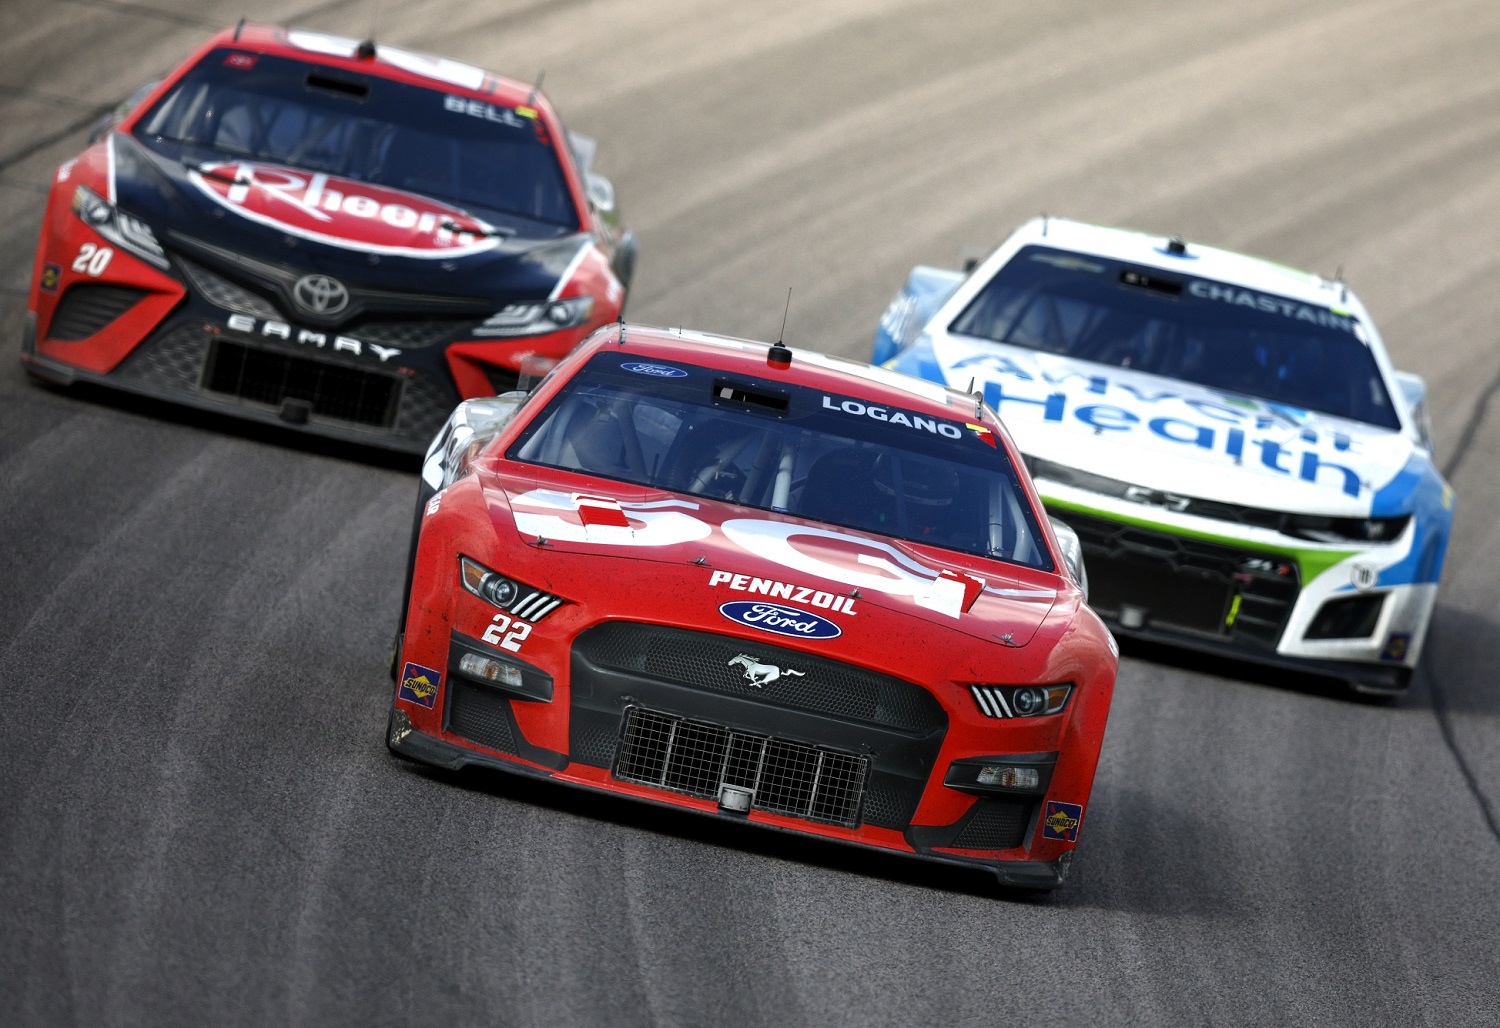 Joey Logano Christopher Bell, and Ross Chastain race during the NASCAR Cup Series AdventHealth 400 at Kansas Speedway on May 15, 2022. | Sean Gardner/Getty Images